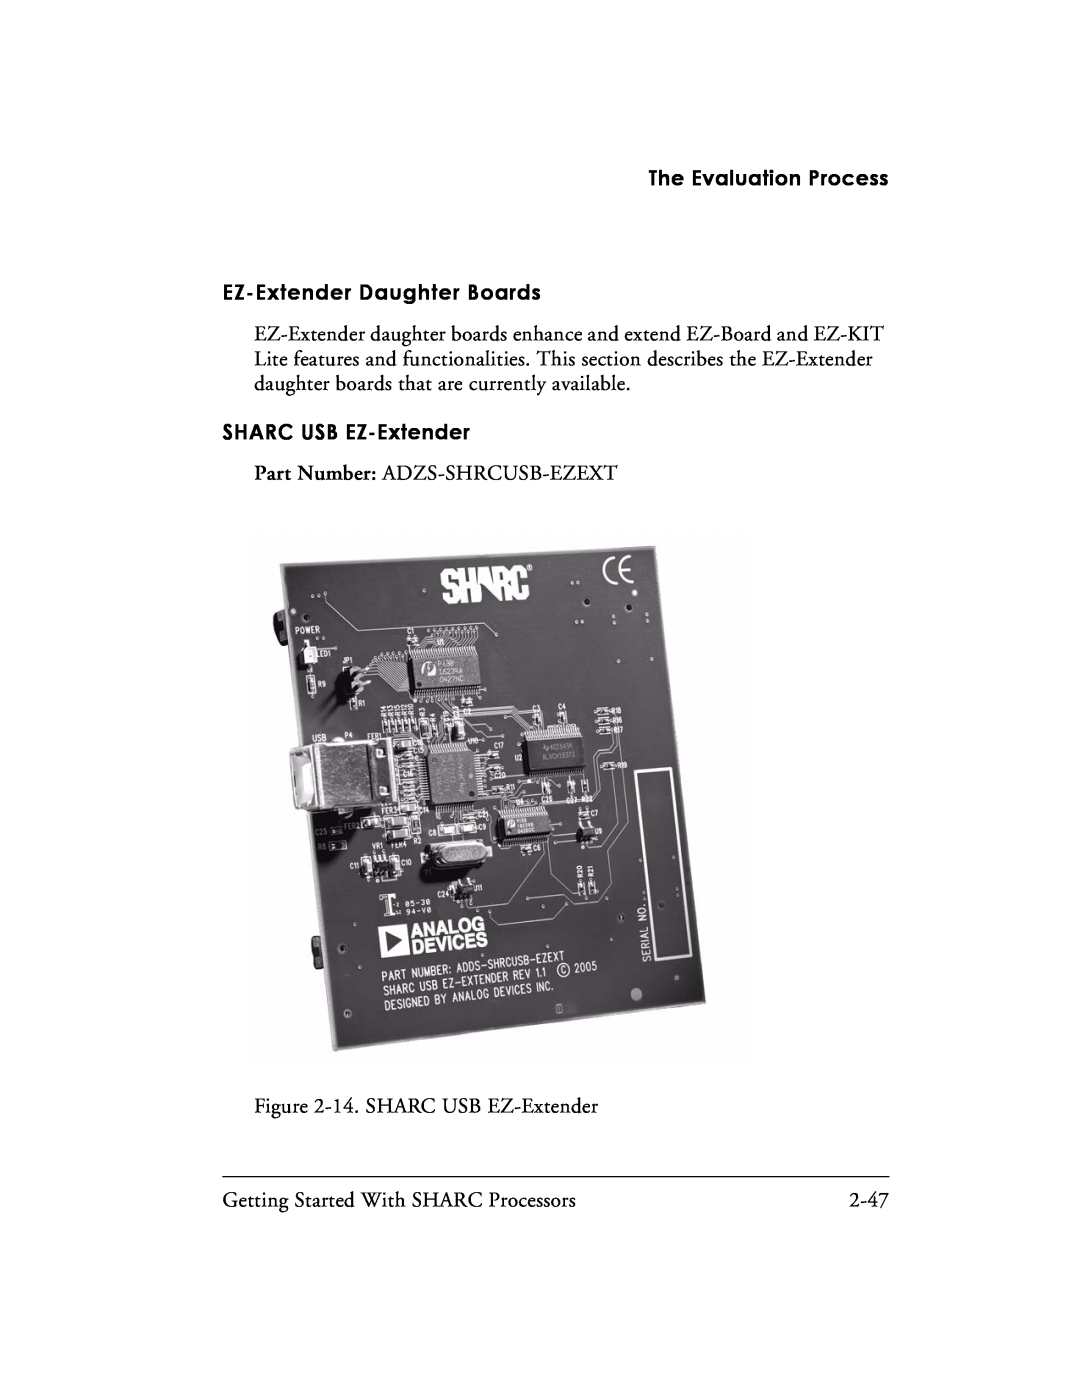 Analog Devices 82-003536-01 manual The Evaluation Process EZ-ExtenderDaughter Boards, SHARC USB EZ-Extender, 2-47 